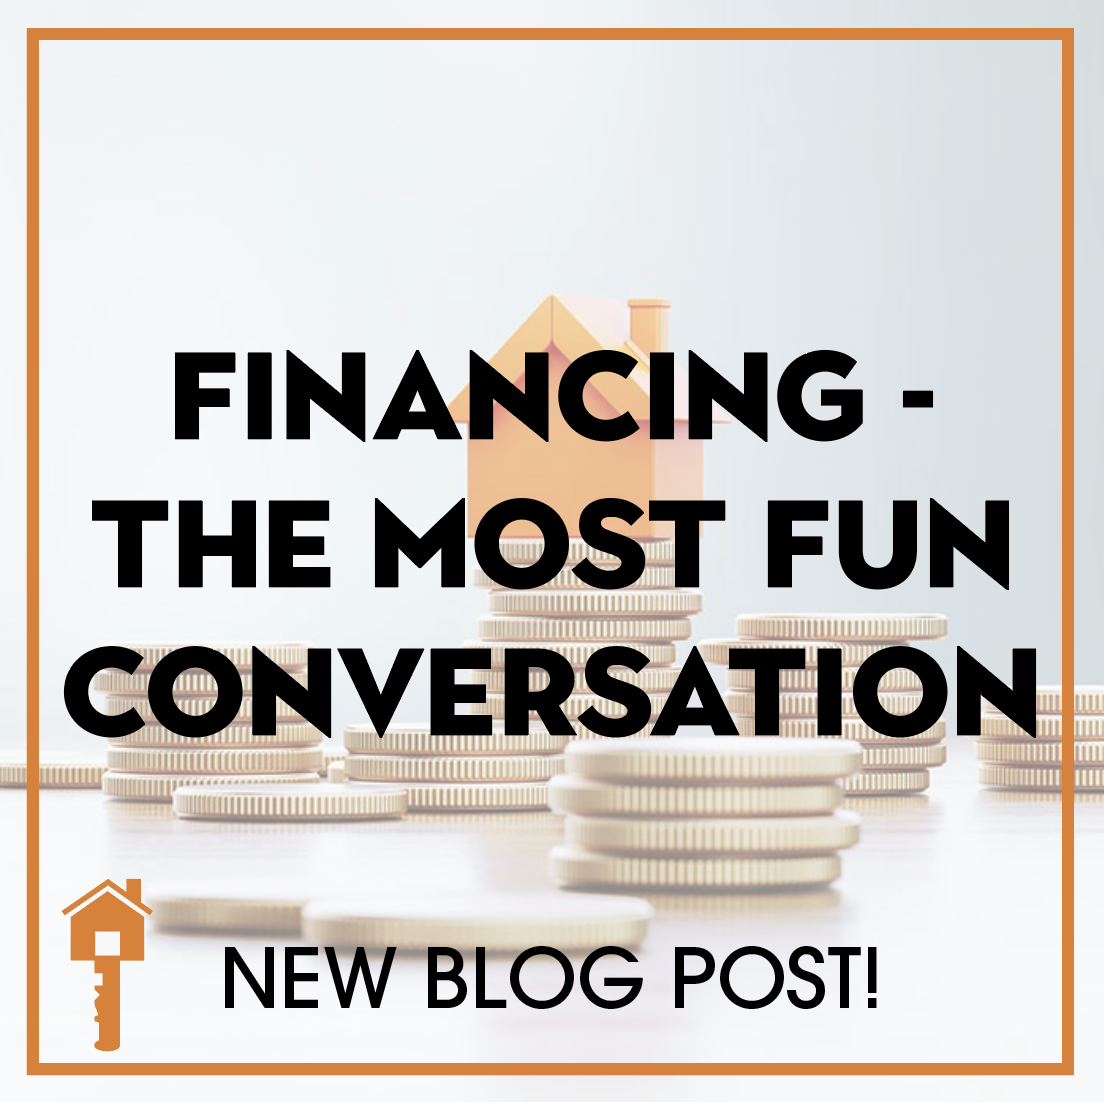 Text " Financing - The Most Fun Conversation" written meme style over a photo of an orange house over money to promote new blog post.